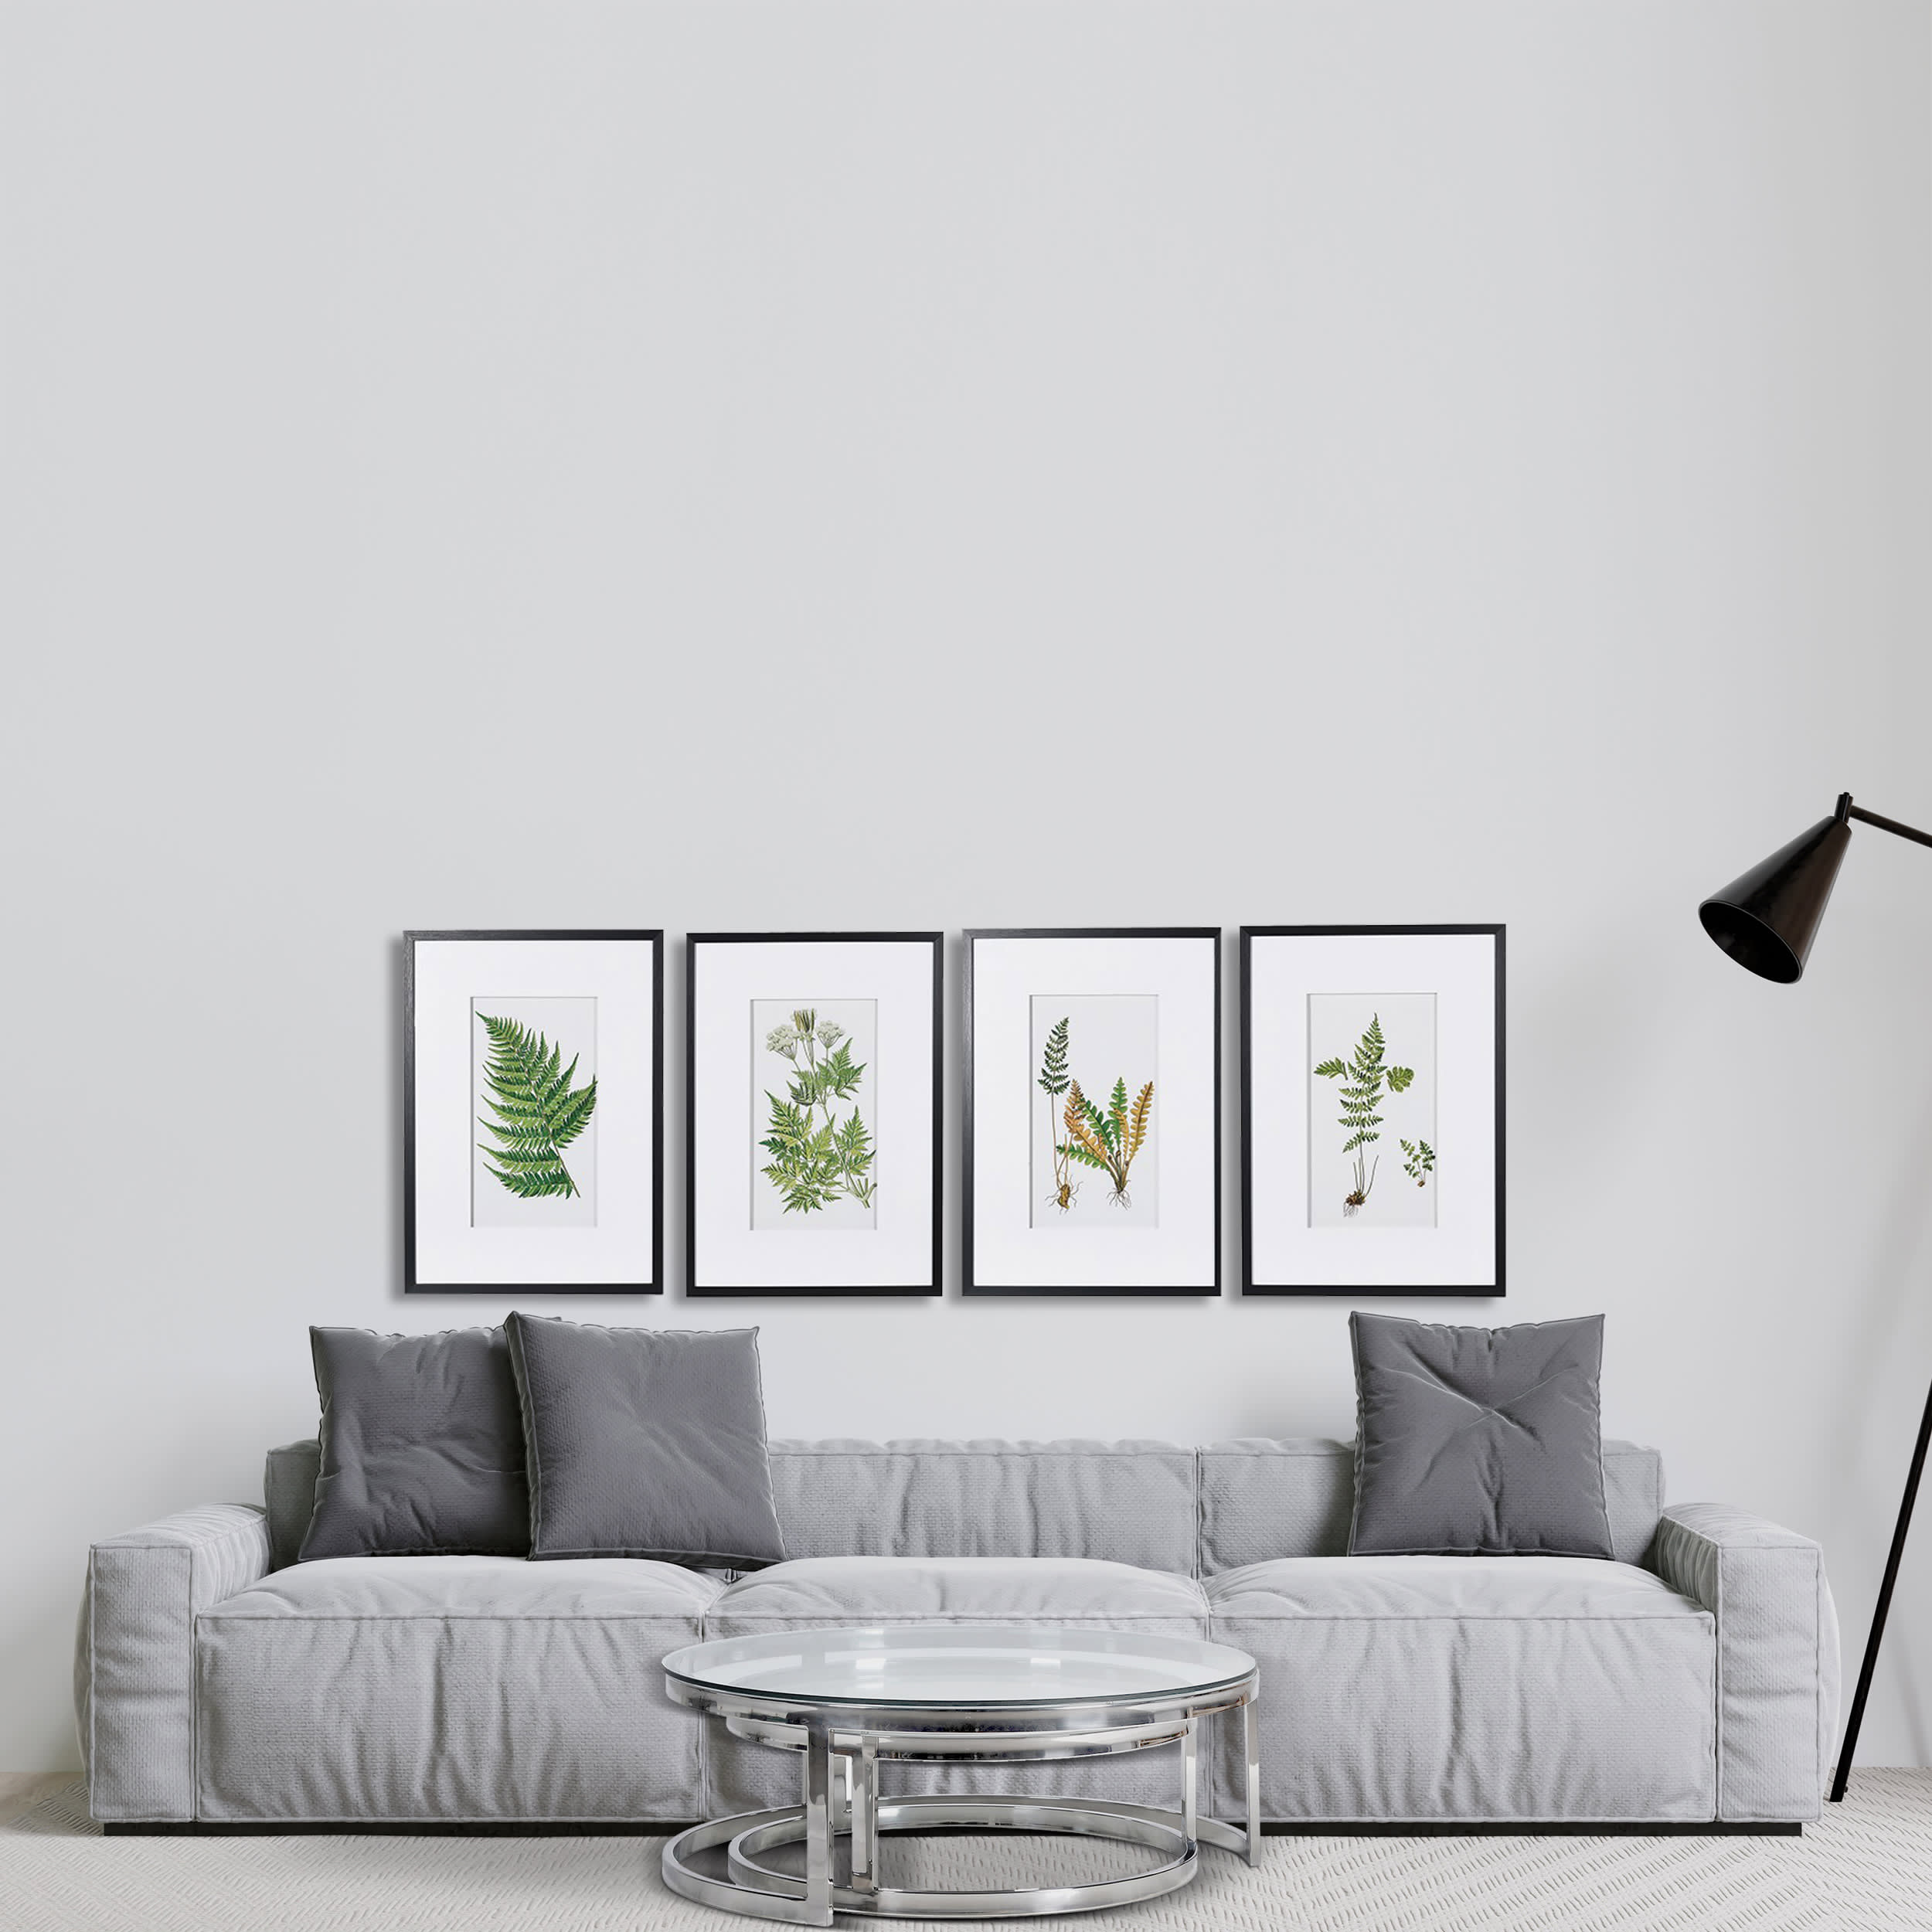 Set of 4 Fern Wall Pictures